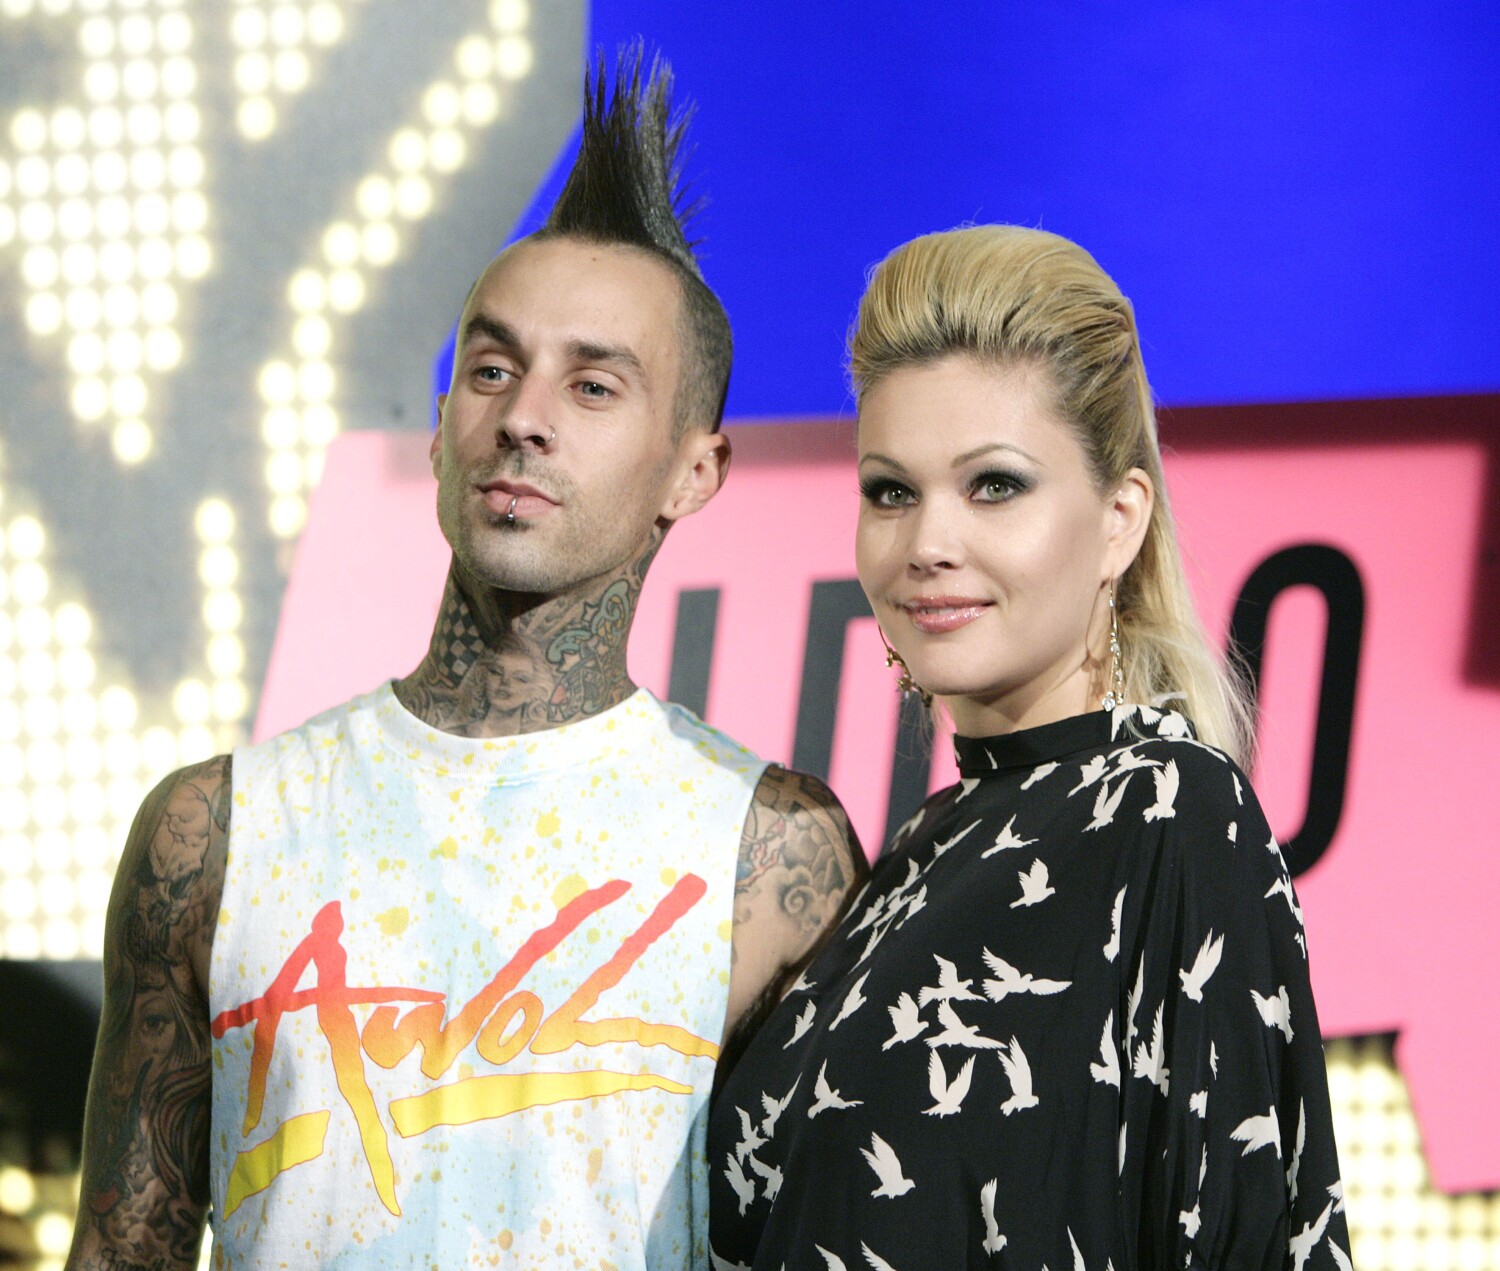 Rocker Travis Barker 'beat the odds' before and will again, says ex Shanna Moakler